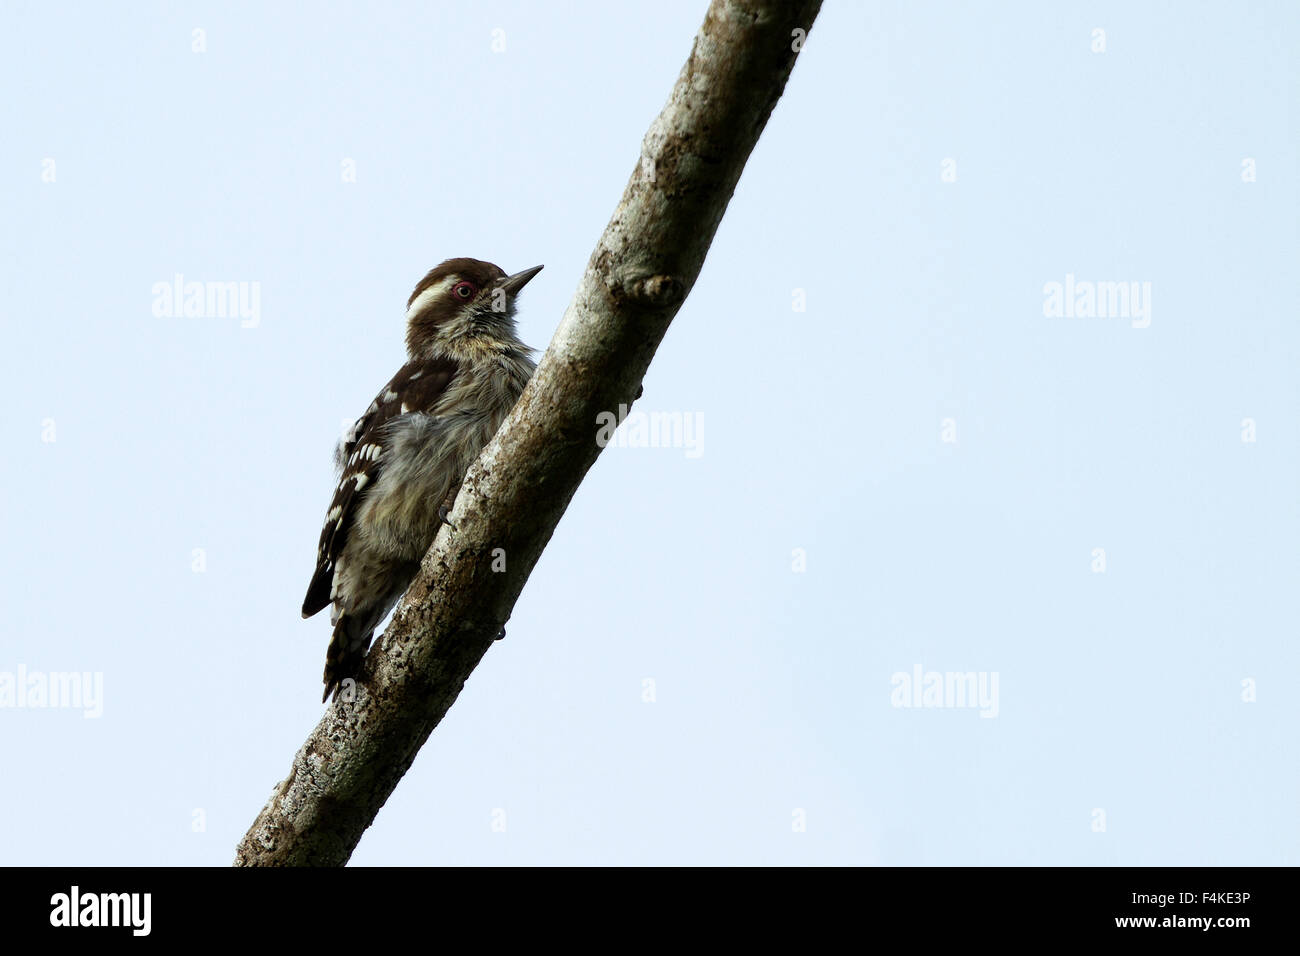 The grey-capped pygmy woodpecker (Picoides canicapillus) is an Asian bird species of in the woodpecker family (Picidae). Stock Photo